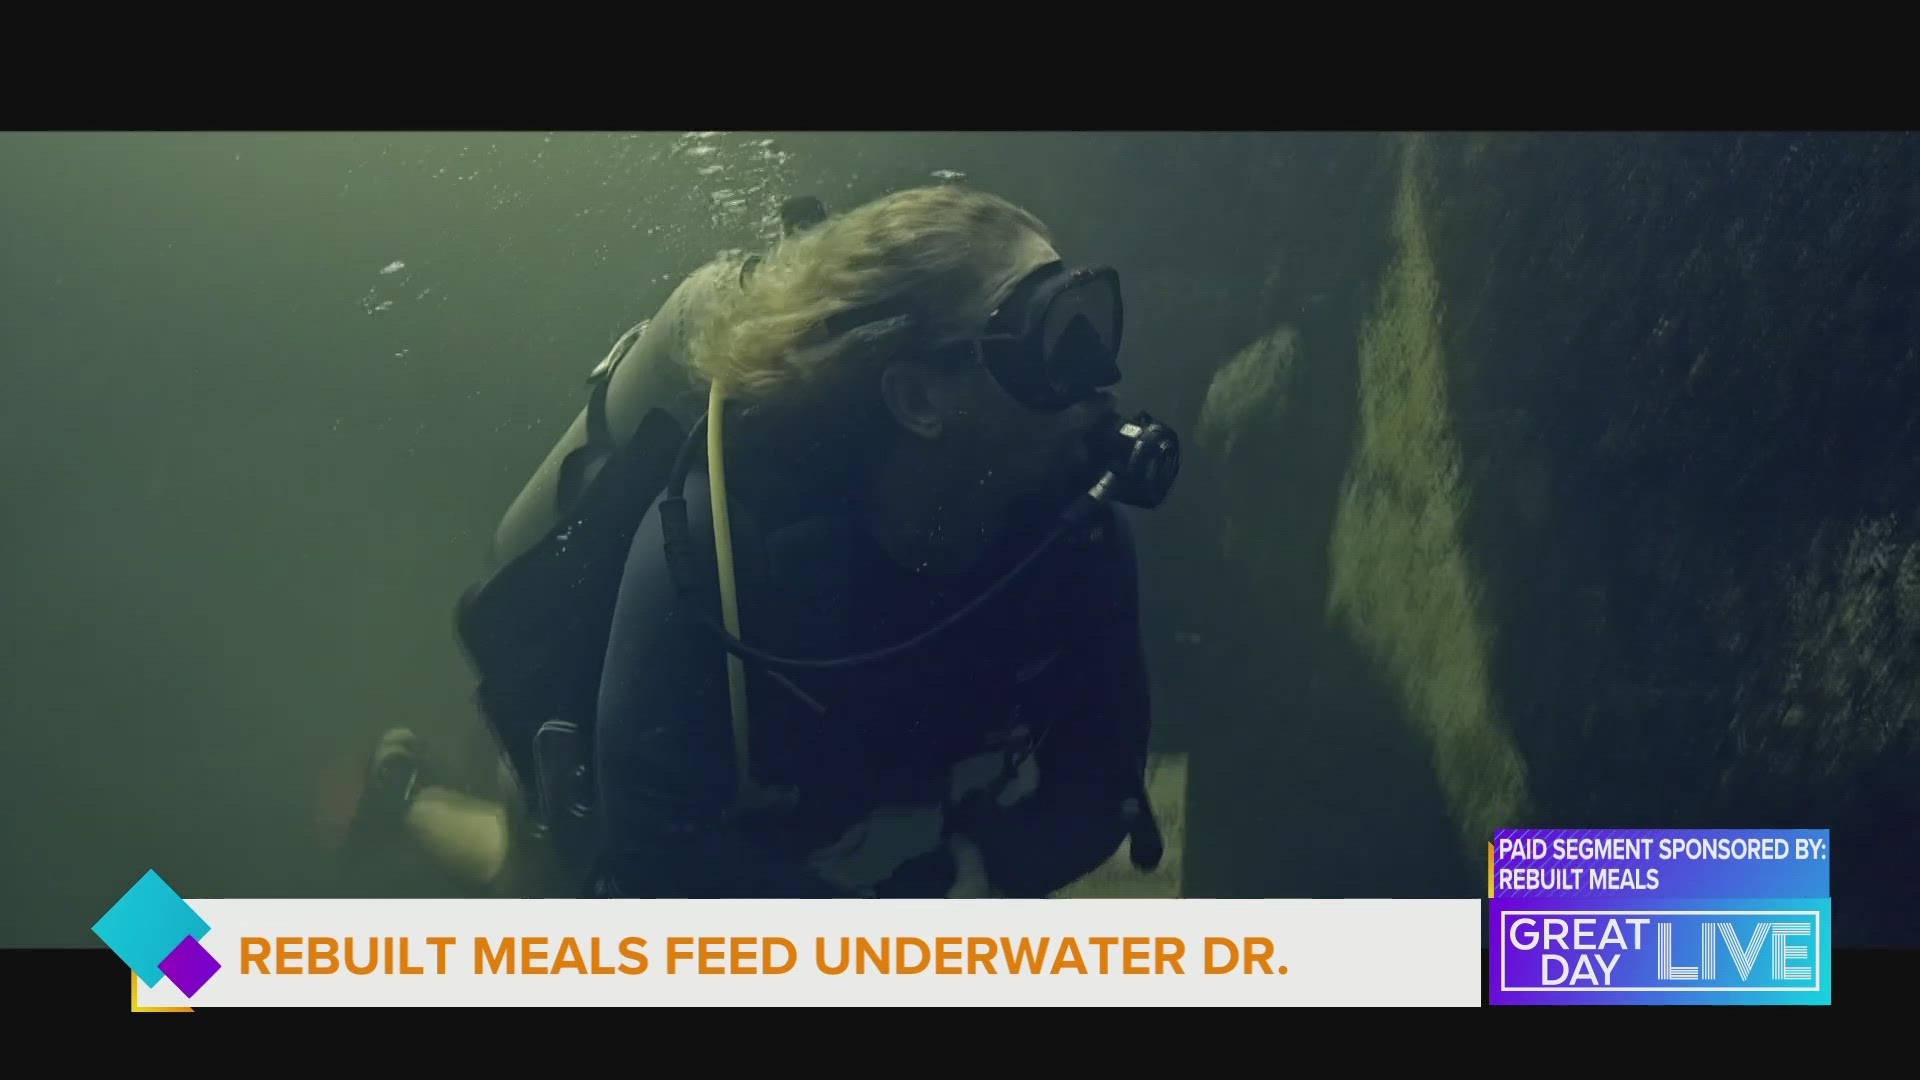 USF Researcher, Dr. Joseph Dituri who is living under water for more than 100 days, teams up with Rebuilt Meals.